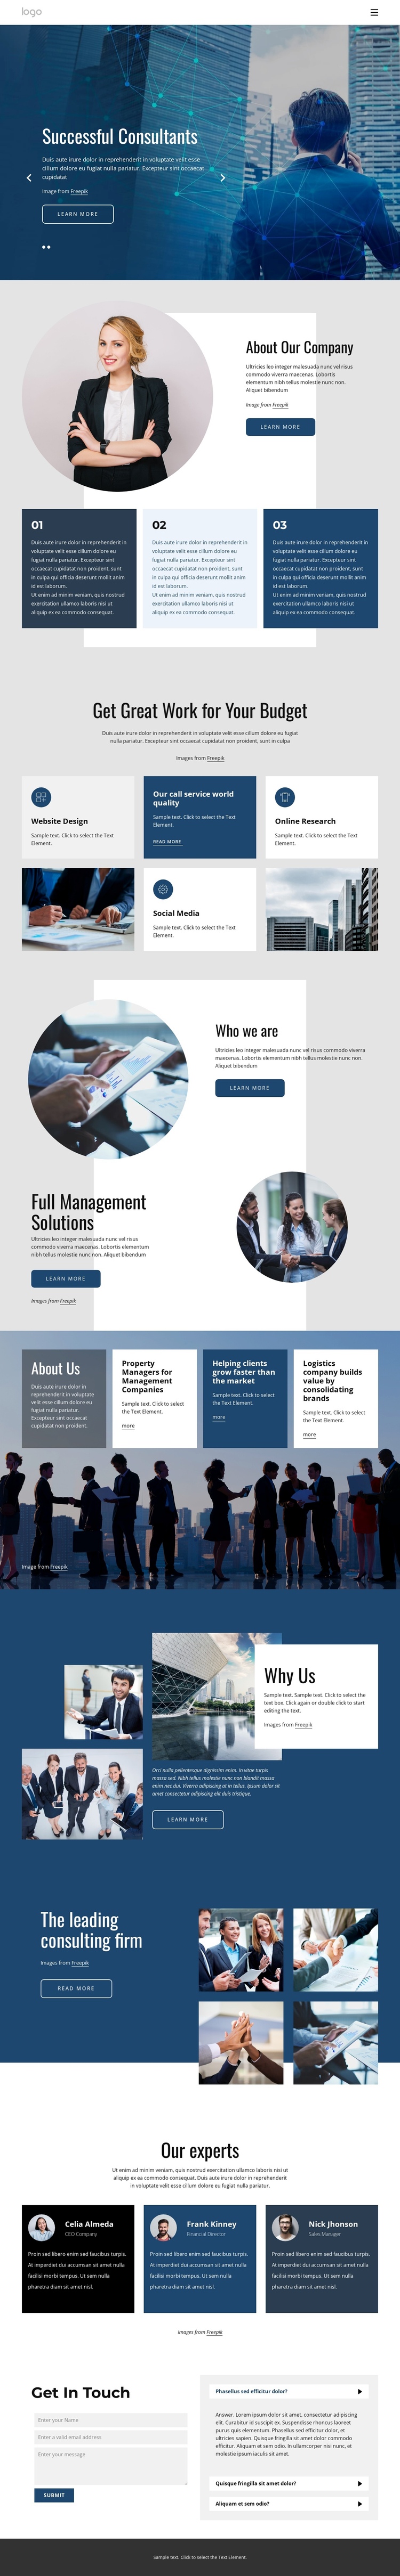 We offer tailored consulting services Website Builder Software